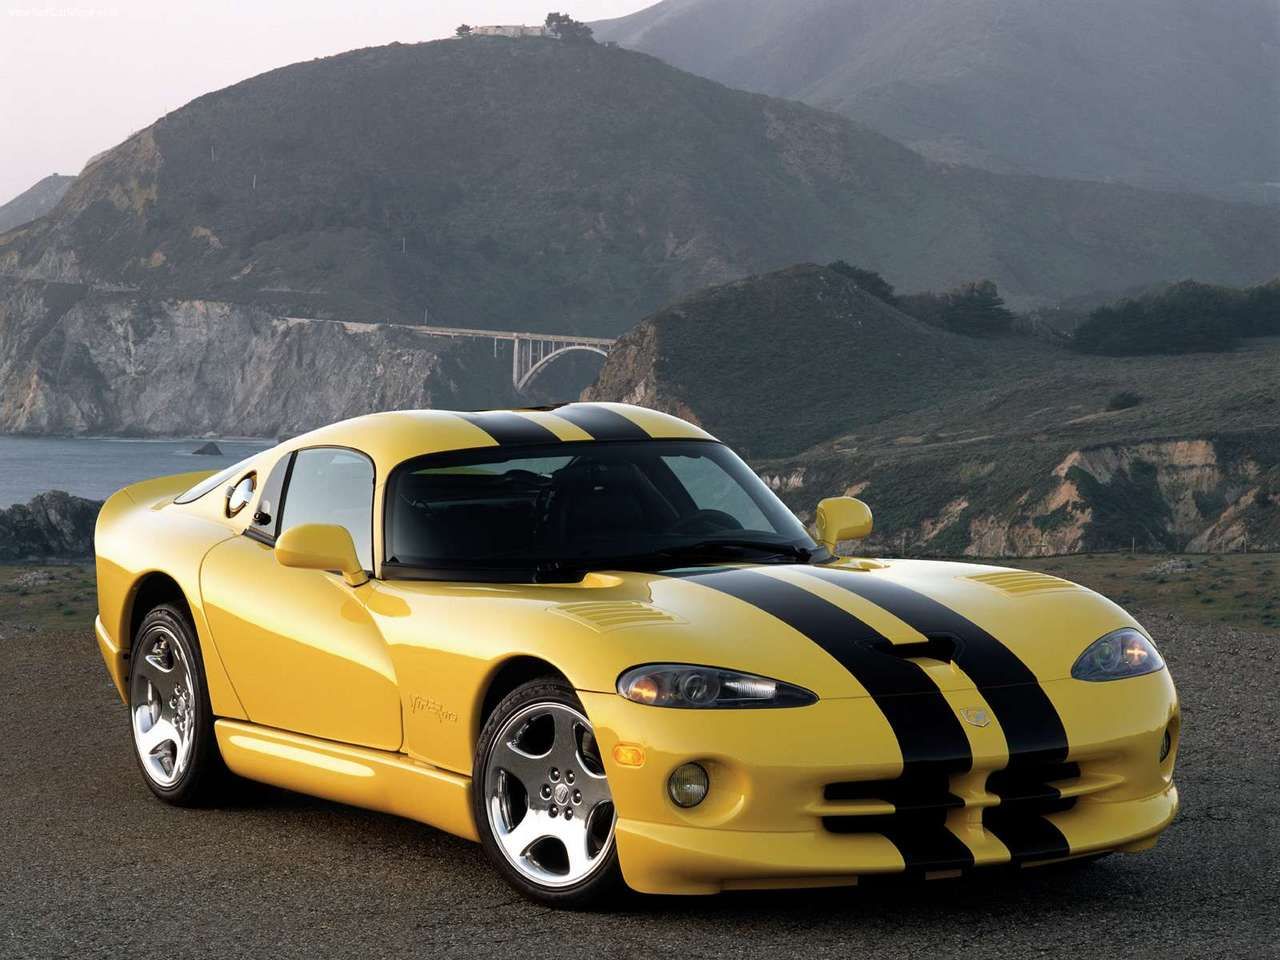 Bright Yellow 2001 Dodge Viper GTS with black stripes with a scenic landscape on the background